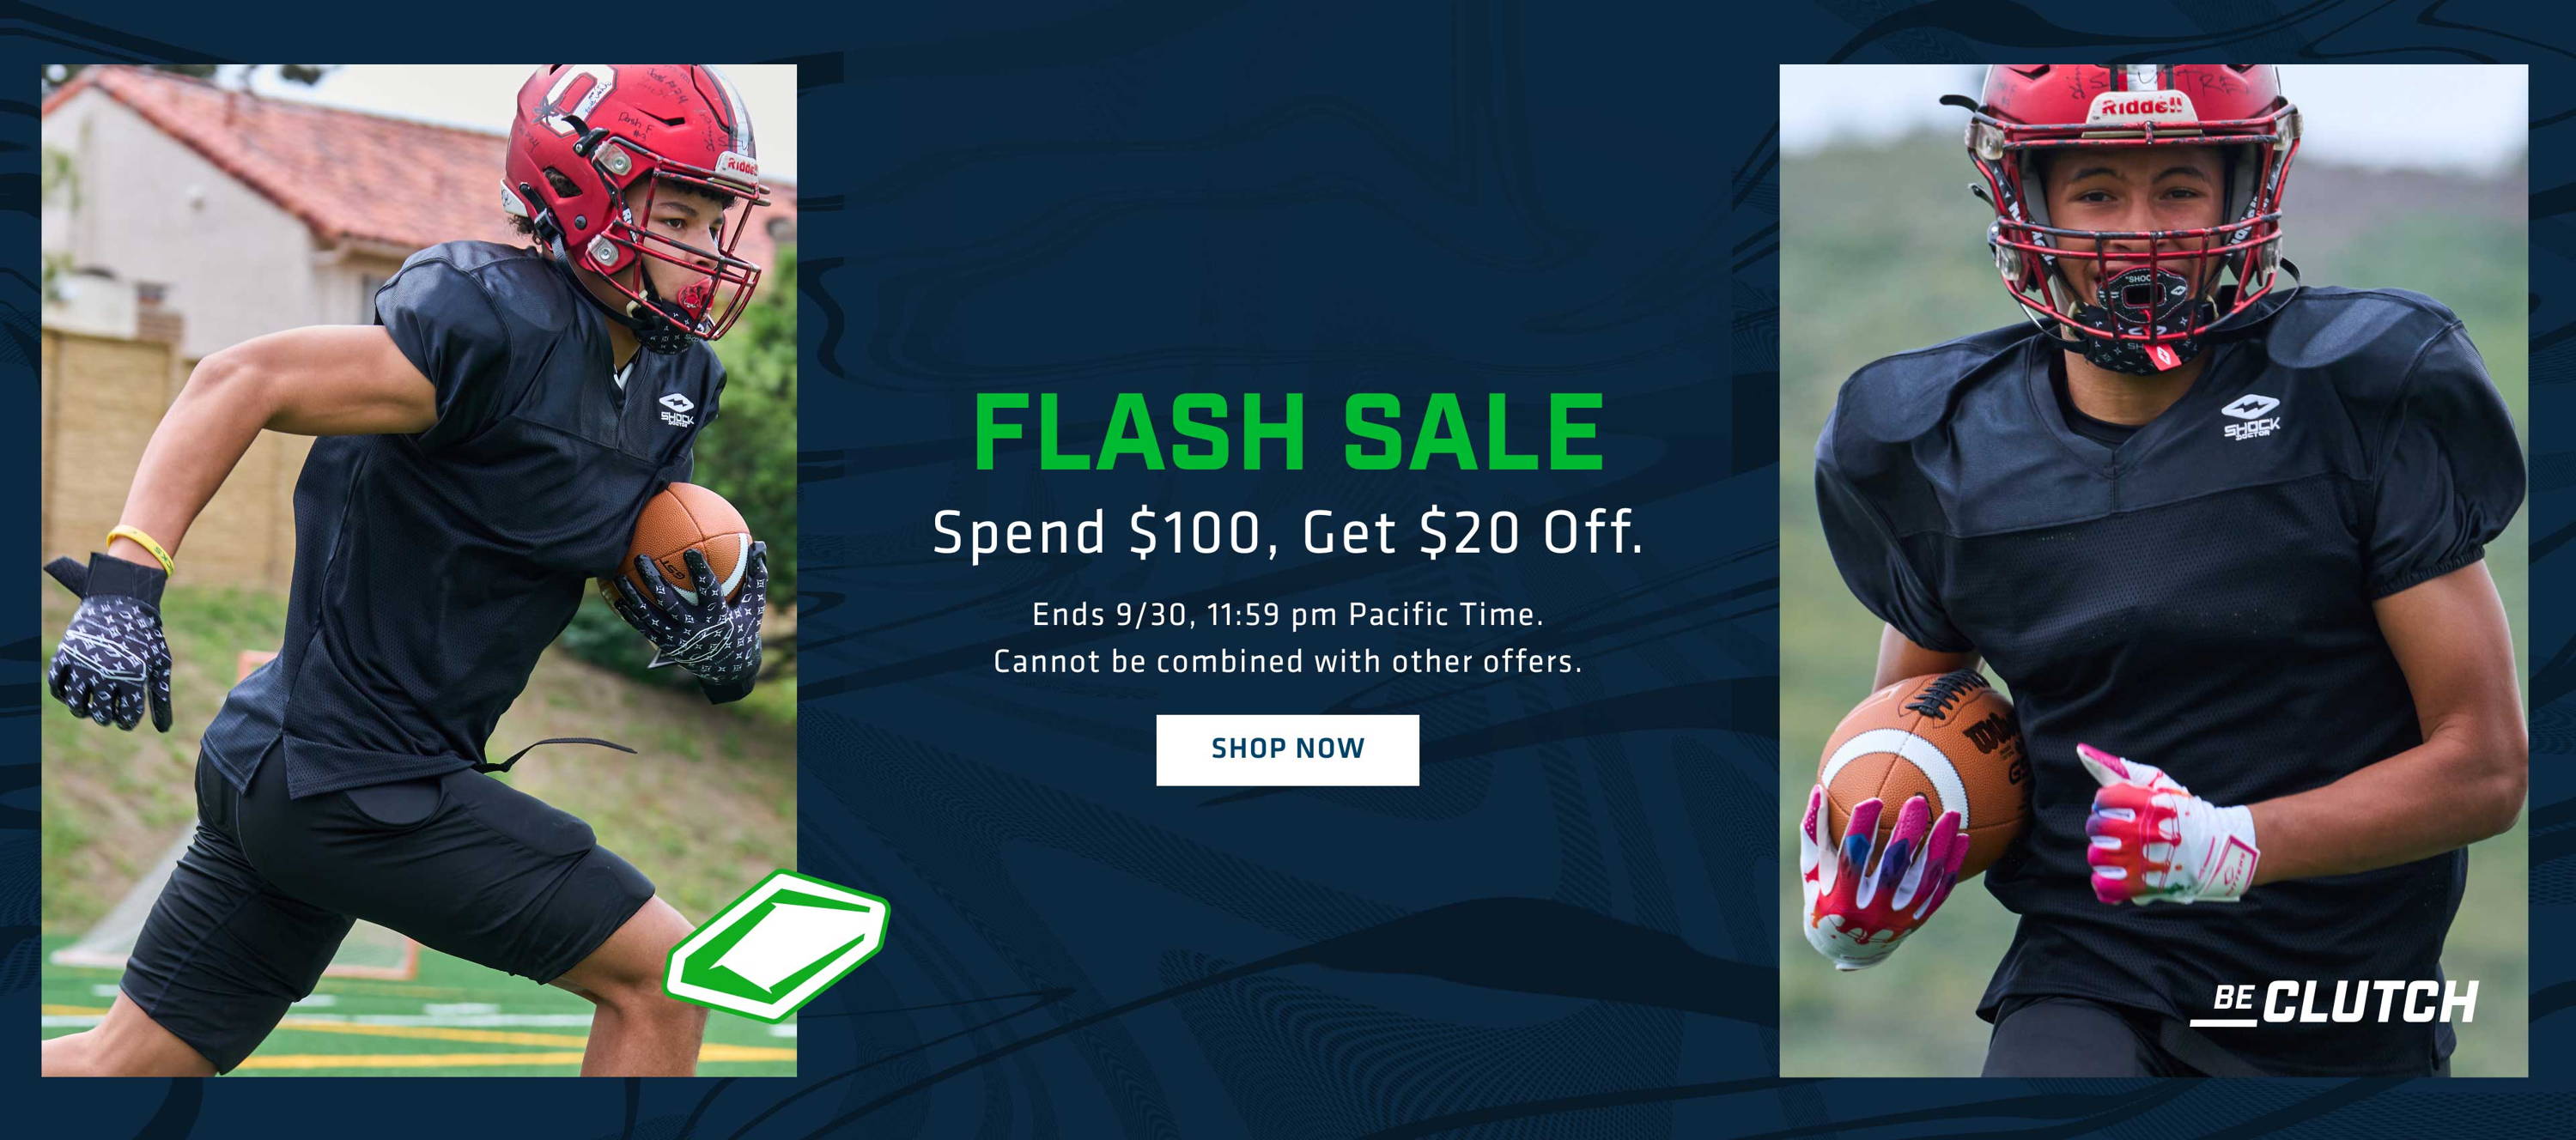 FLASH SALE - Spend $100, Get $20 Off - Ends 9/30 11:59 PM PST. Cannot Be Combined With Other Offers | SHOP NOW